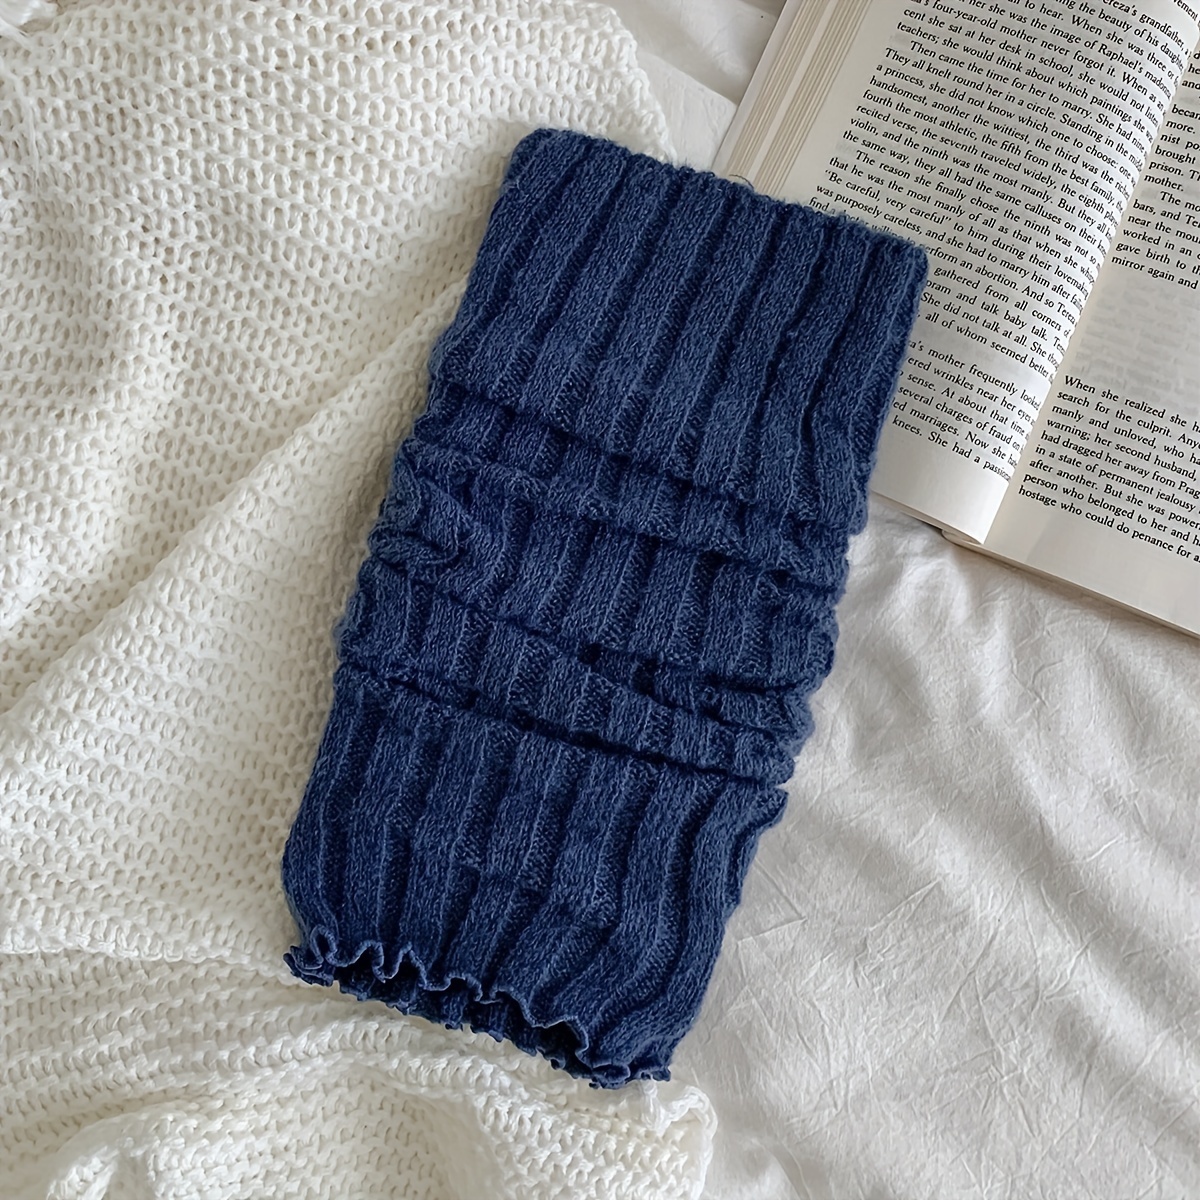 How to knit leg warmers - Gathered